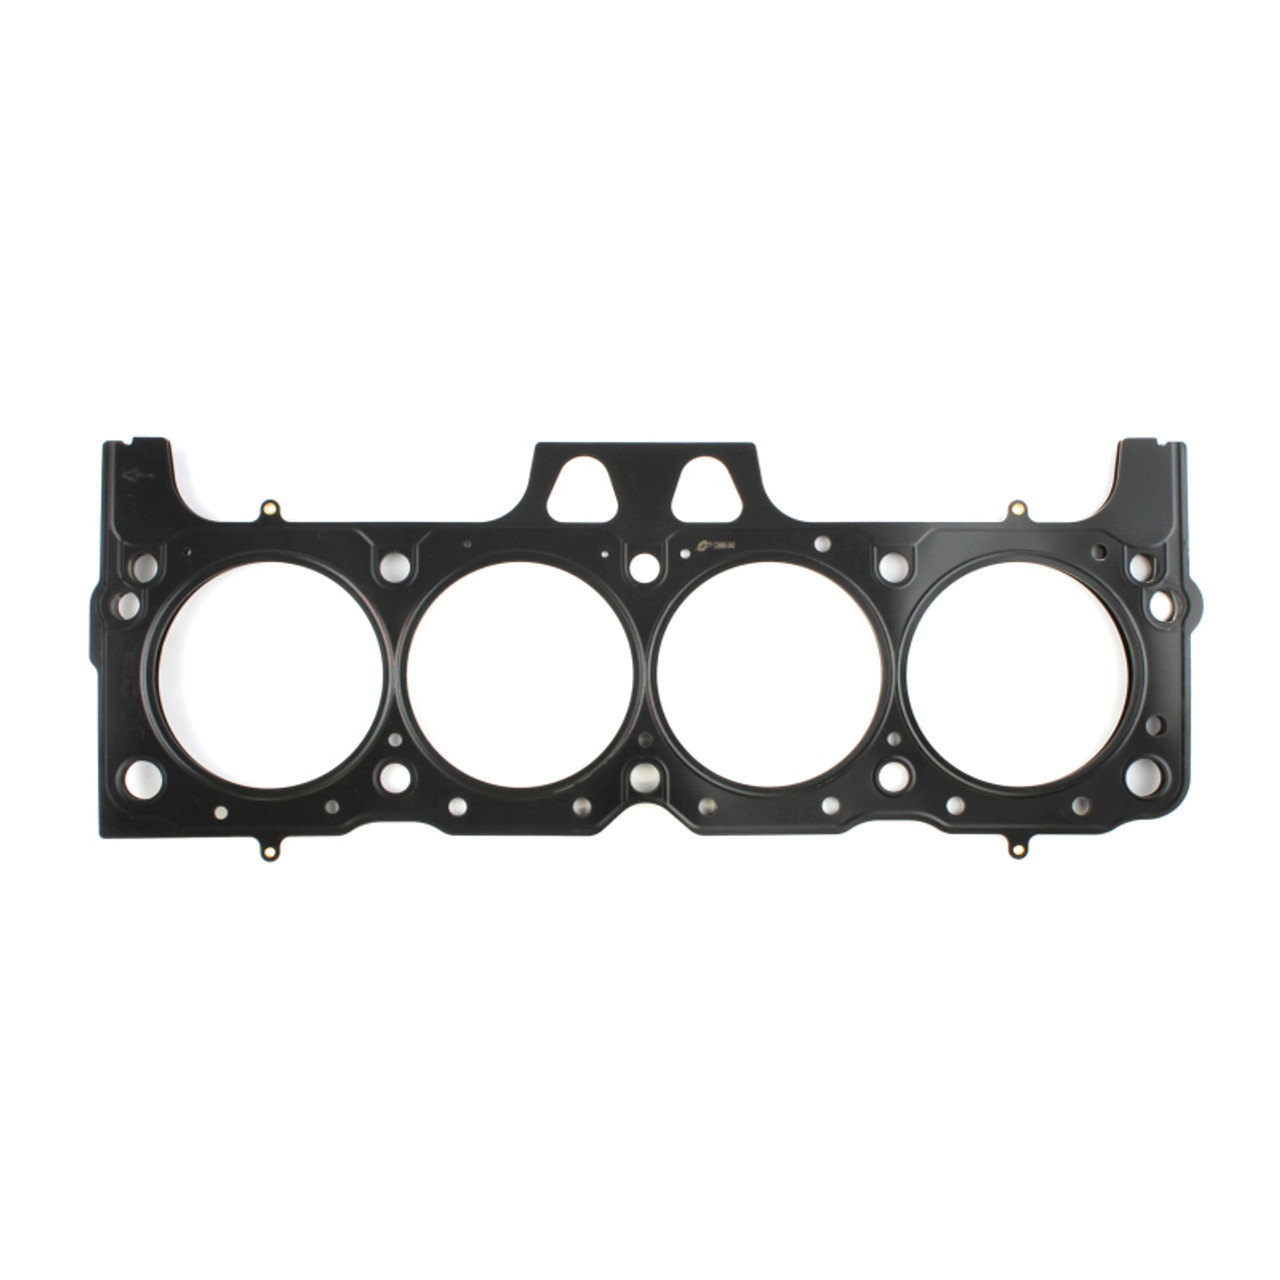 Cometic Ford 385 Series 4.500in Bore .092in MLS Cylinder Head Gasket - C5667-092 Photo - Primary